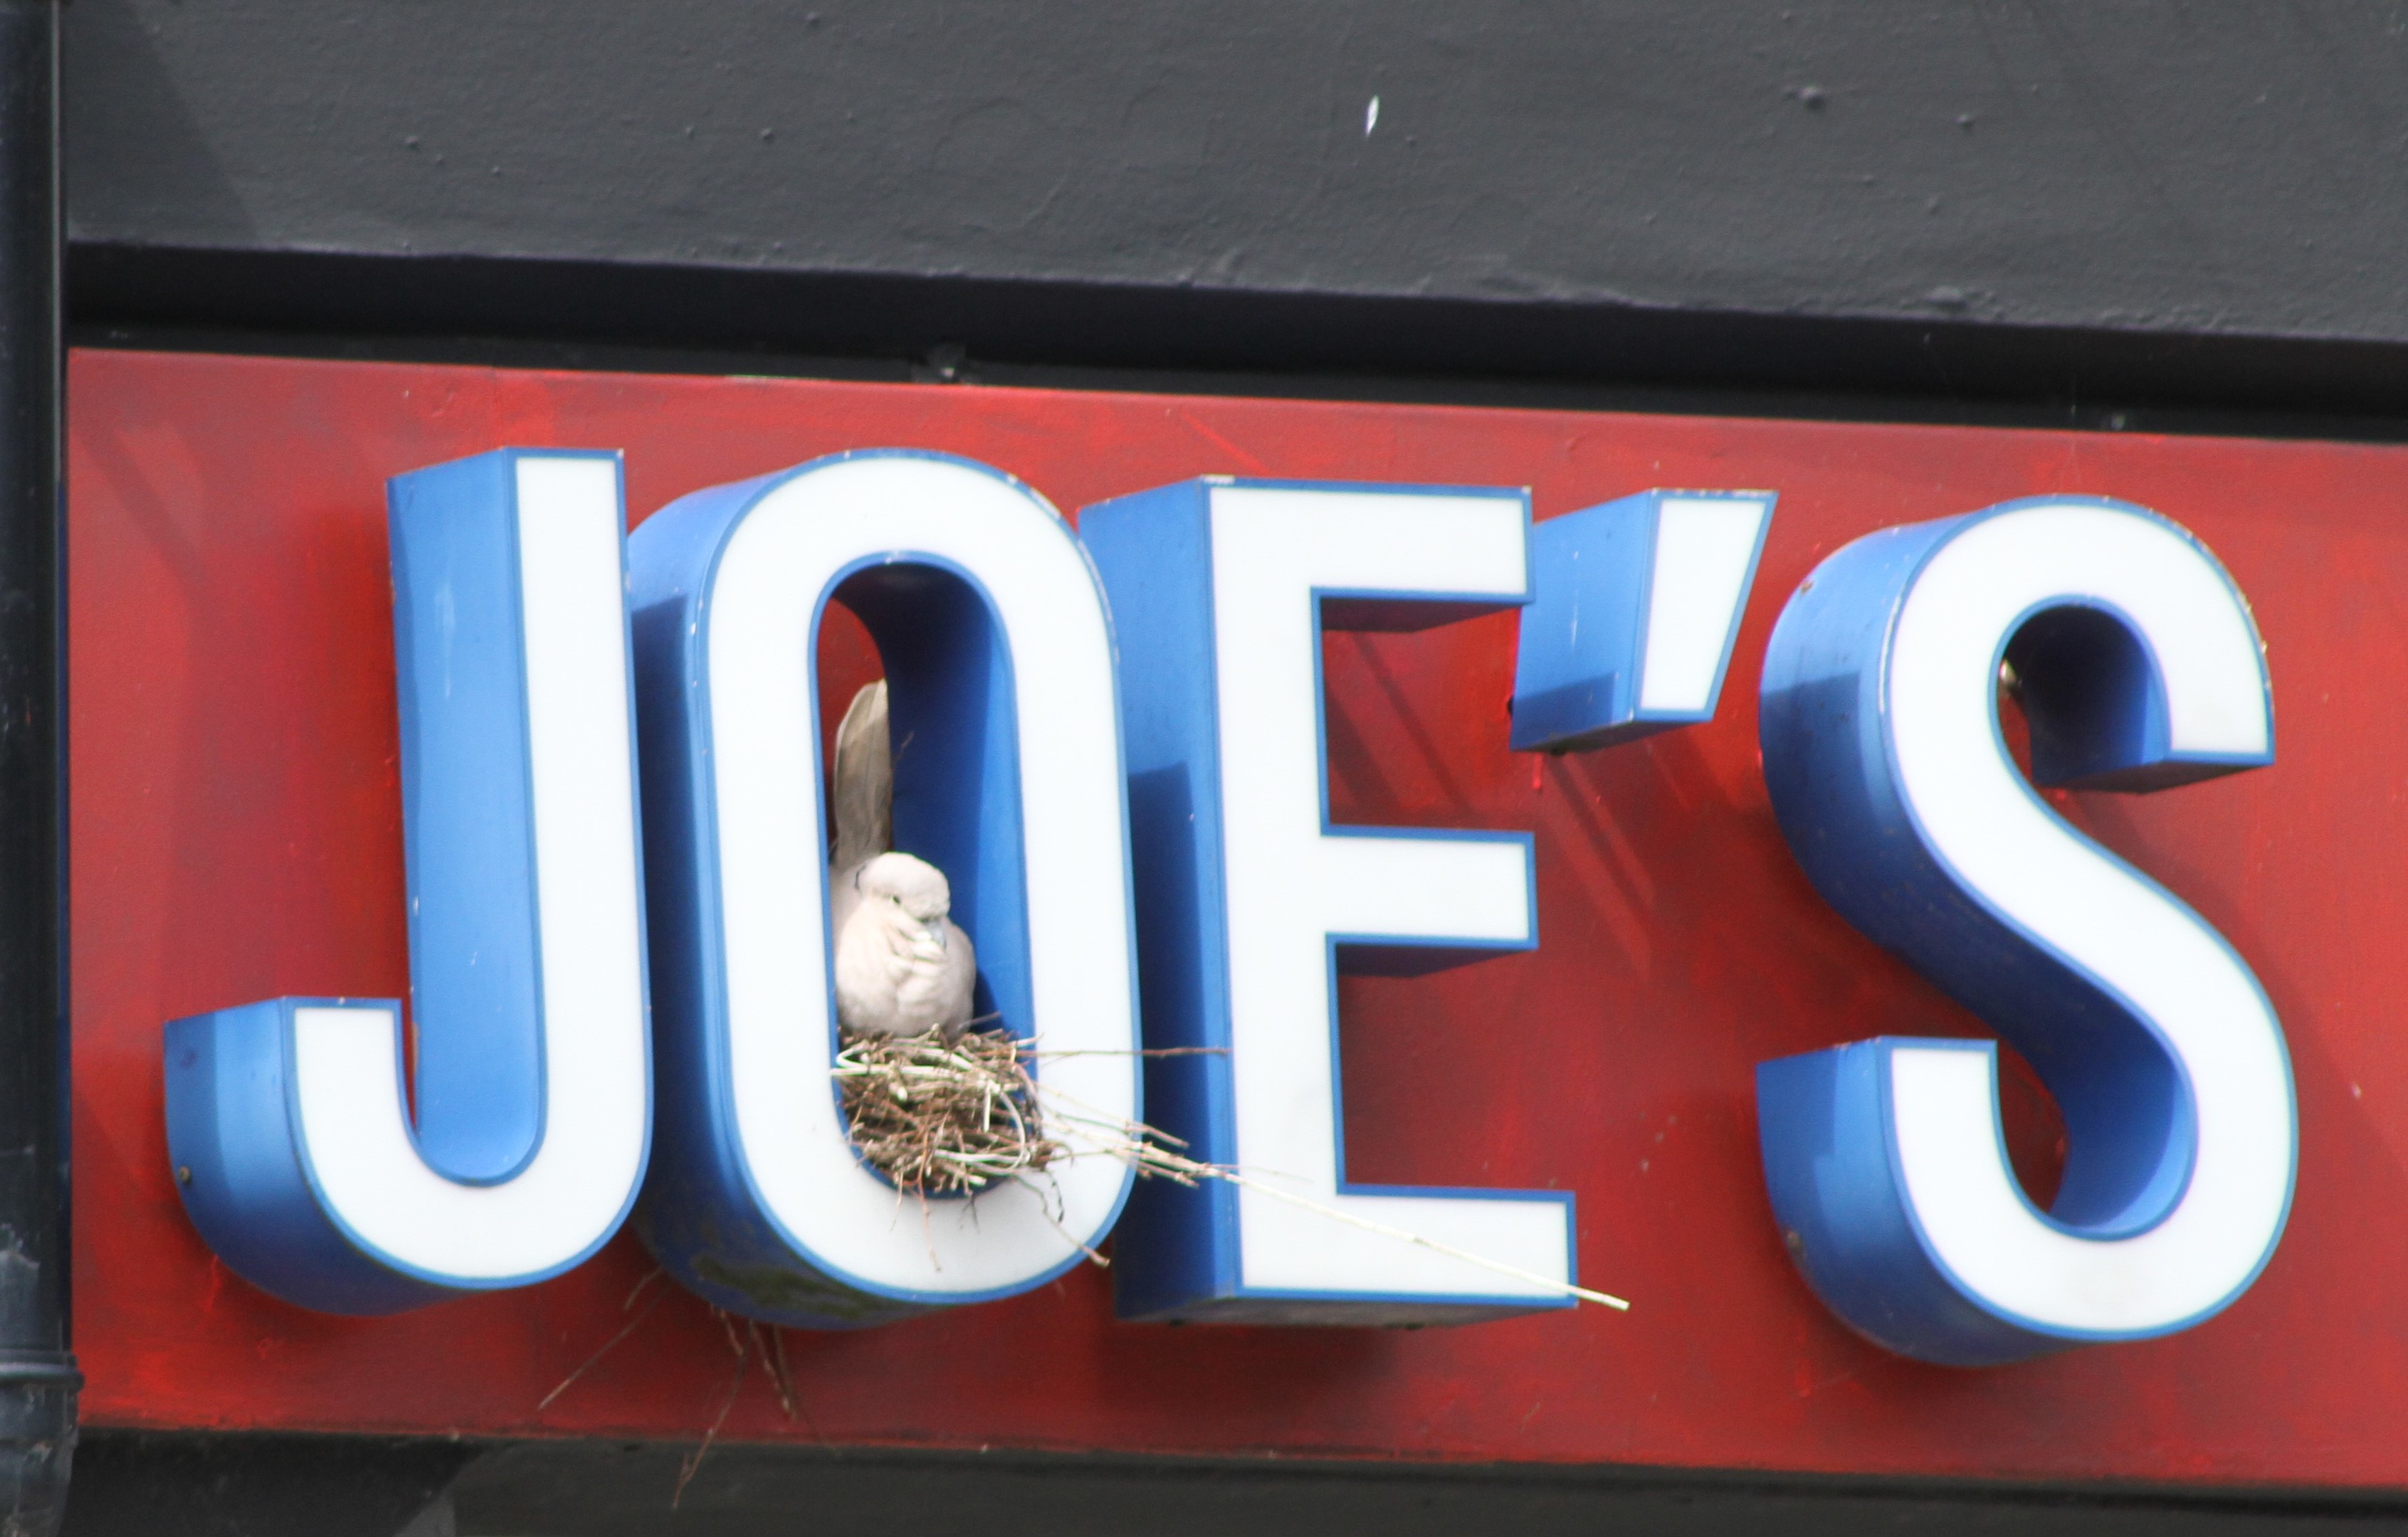 The pigeon at home in the Top Joes sign